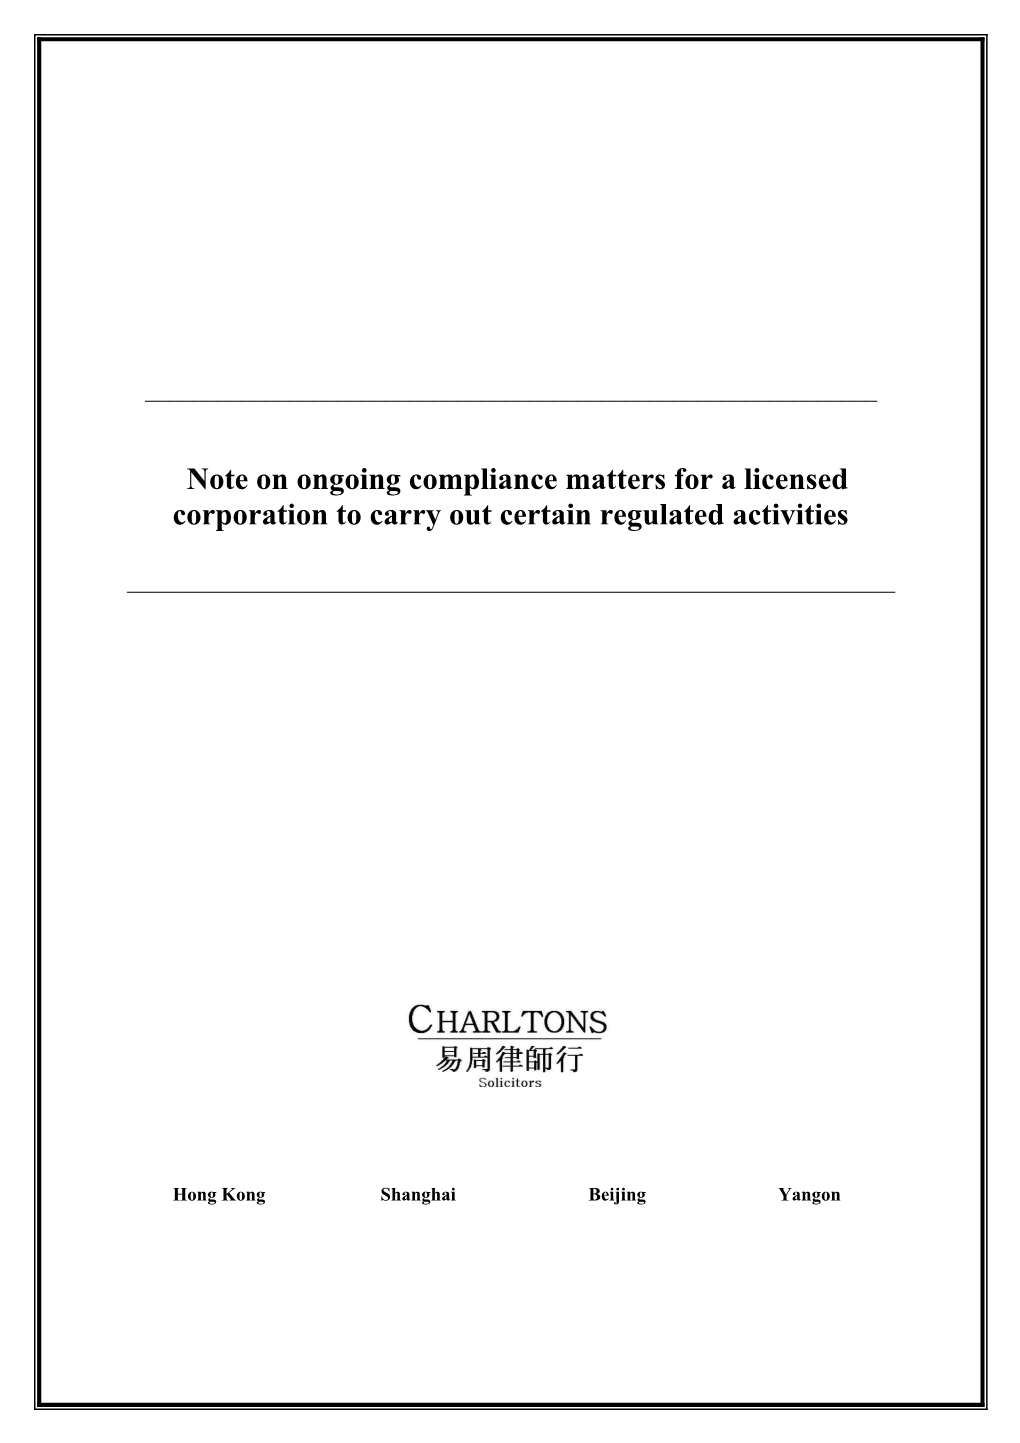 Ongoing Compliance Matters for a Licensed Corporation to Carry out Certain Regulated Activities